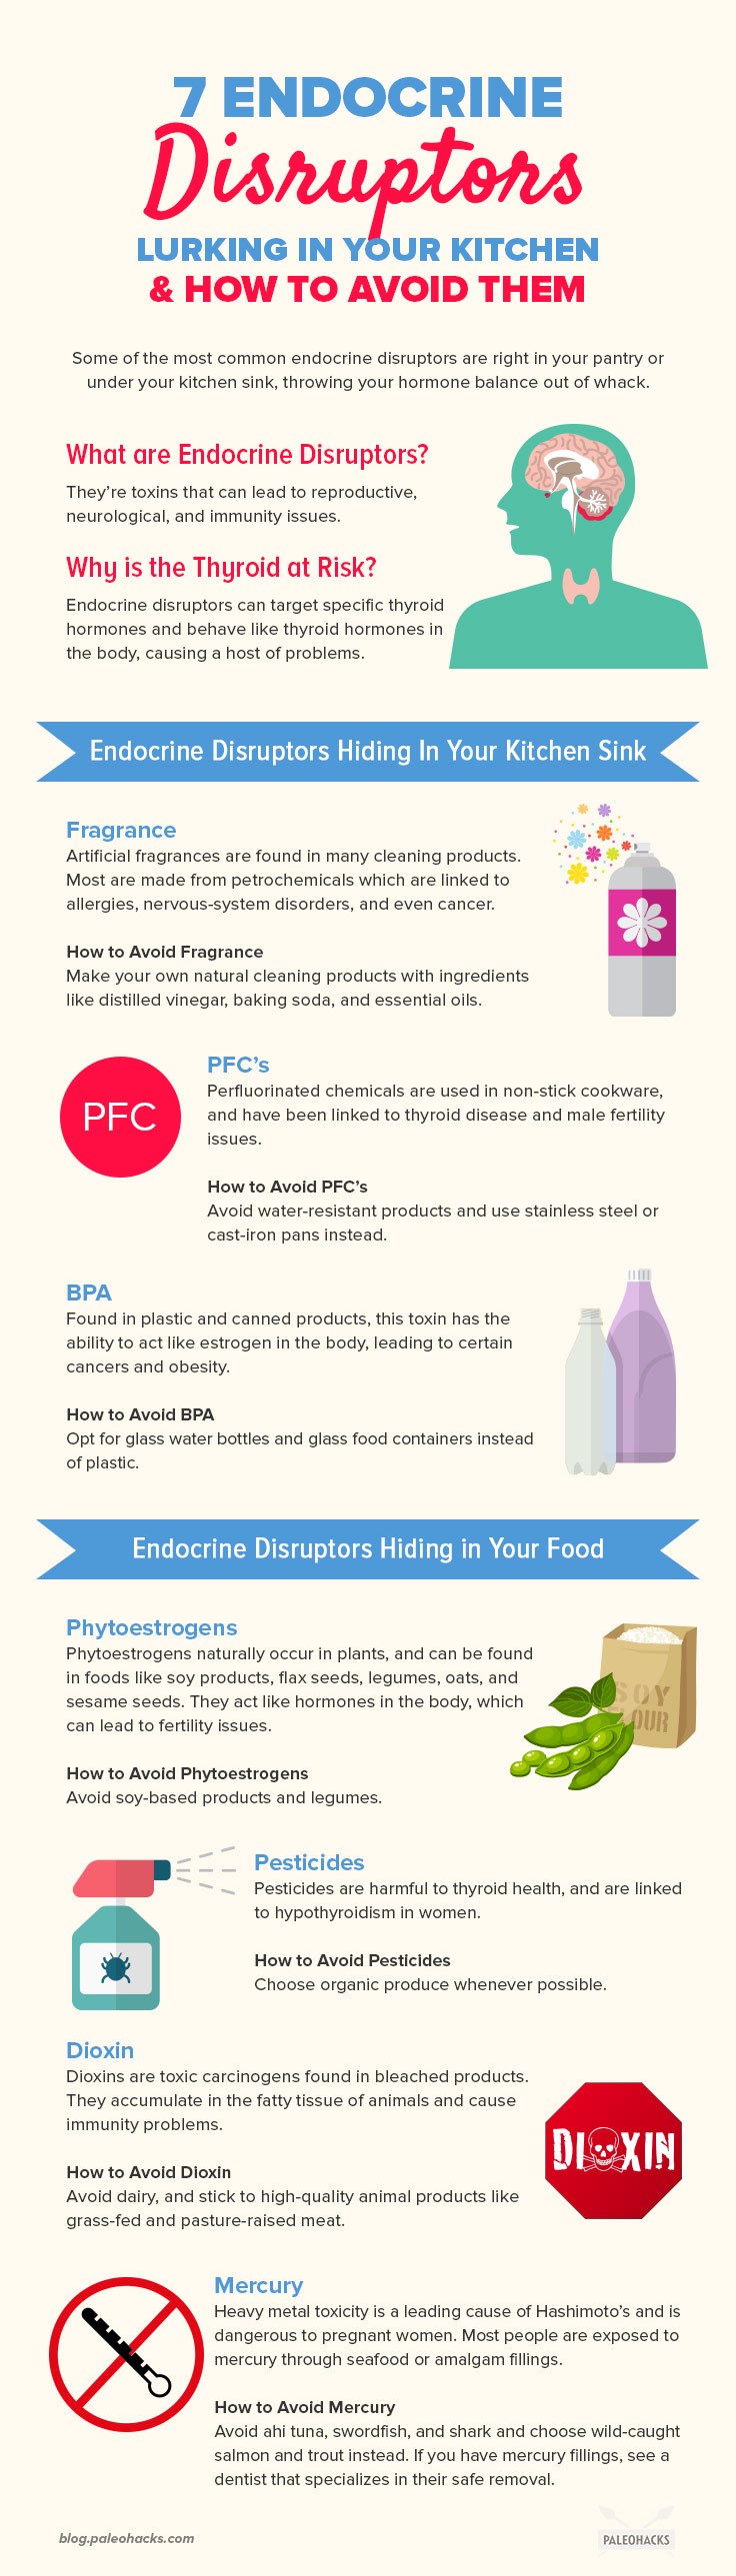 What if I told you that some of the most common endocrine disruptors are sitting right in your pantry or under your kitchen sink?